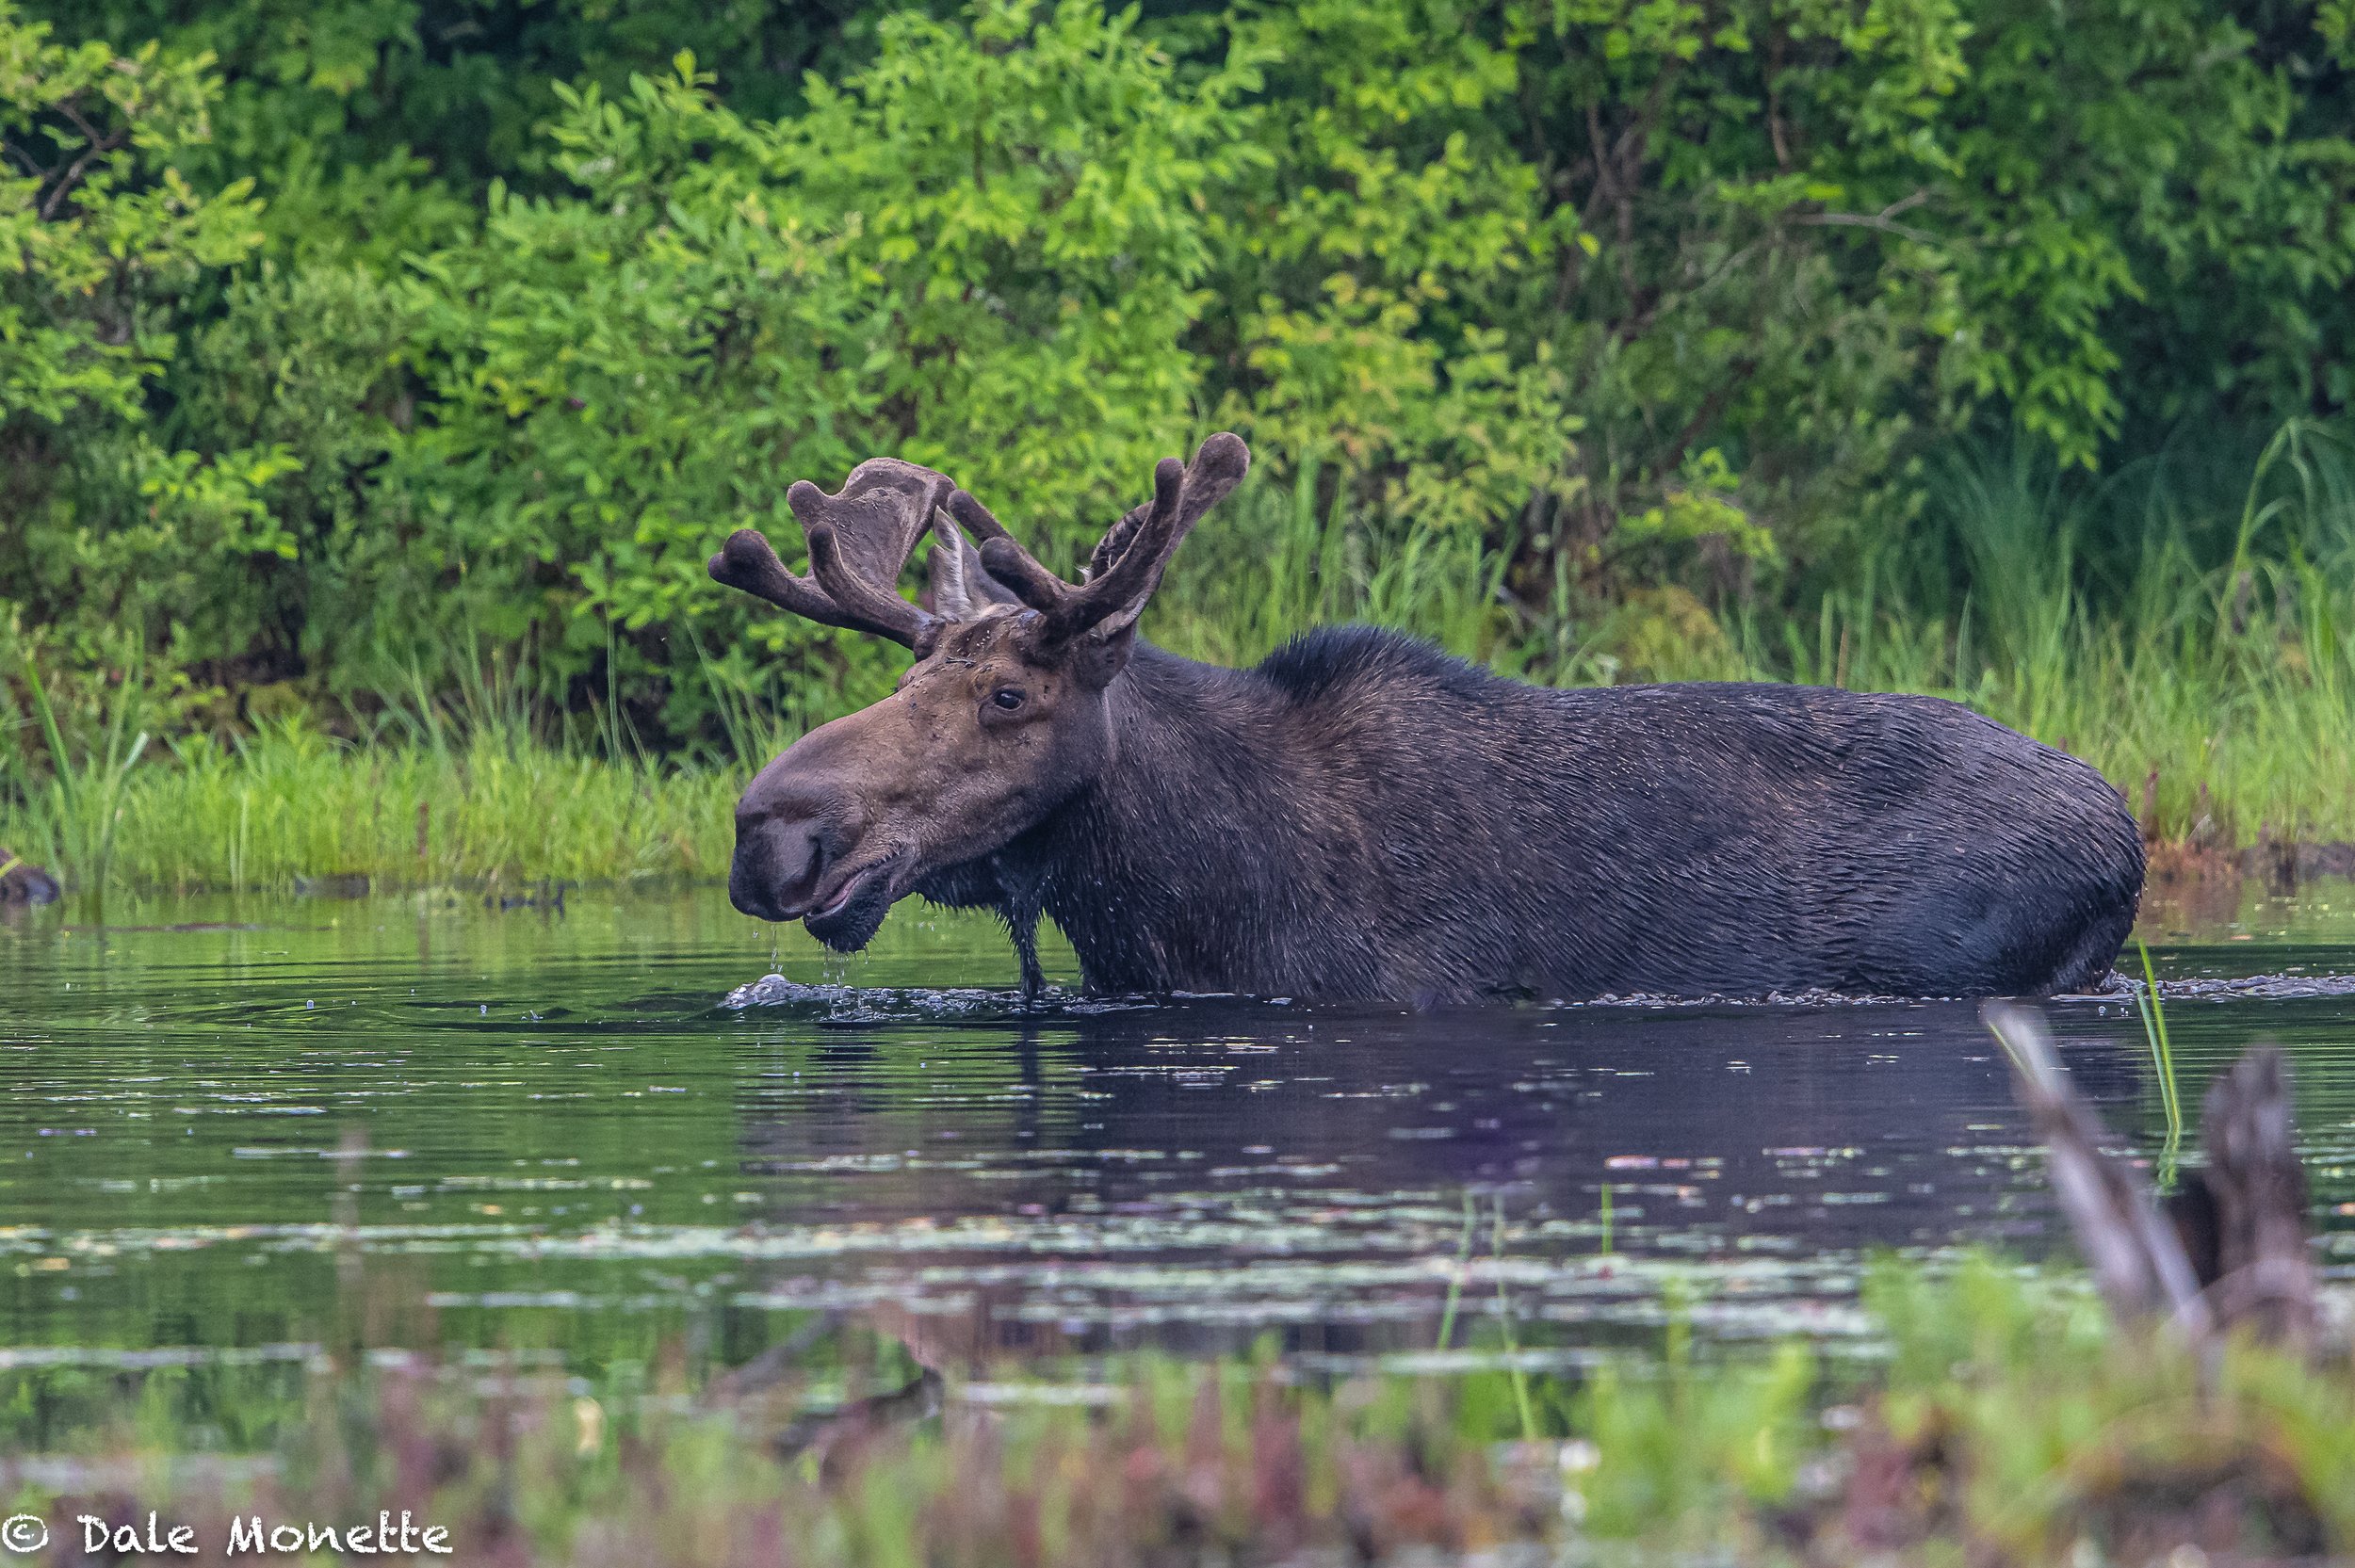   I see this moose every year in the same pond. He has an unmistakable notch in his right ear.  Easy to tell him from other bulls in the area.  